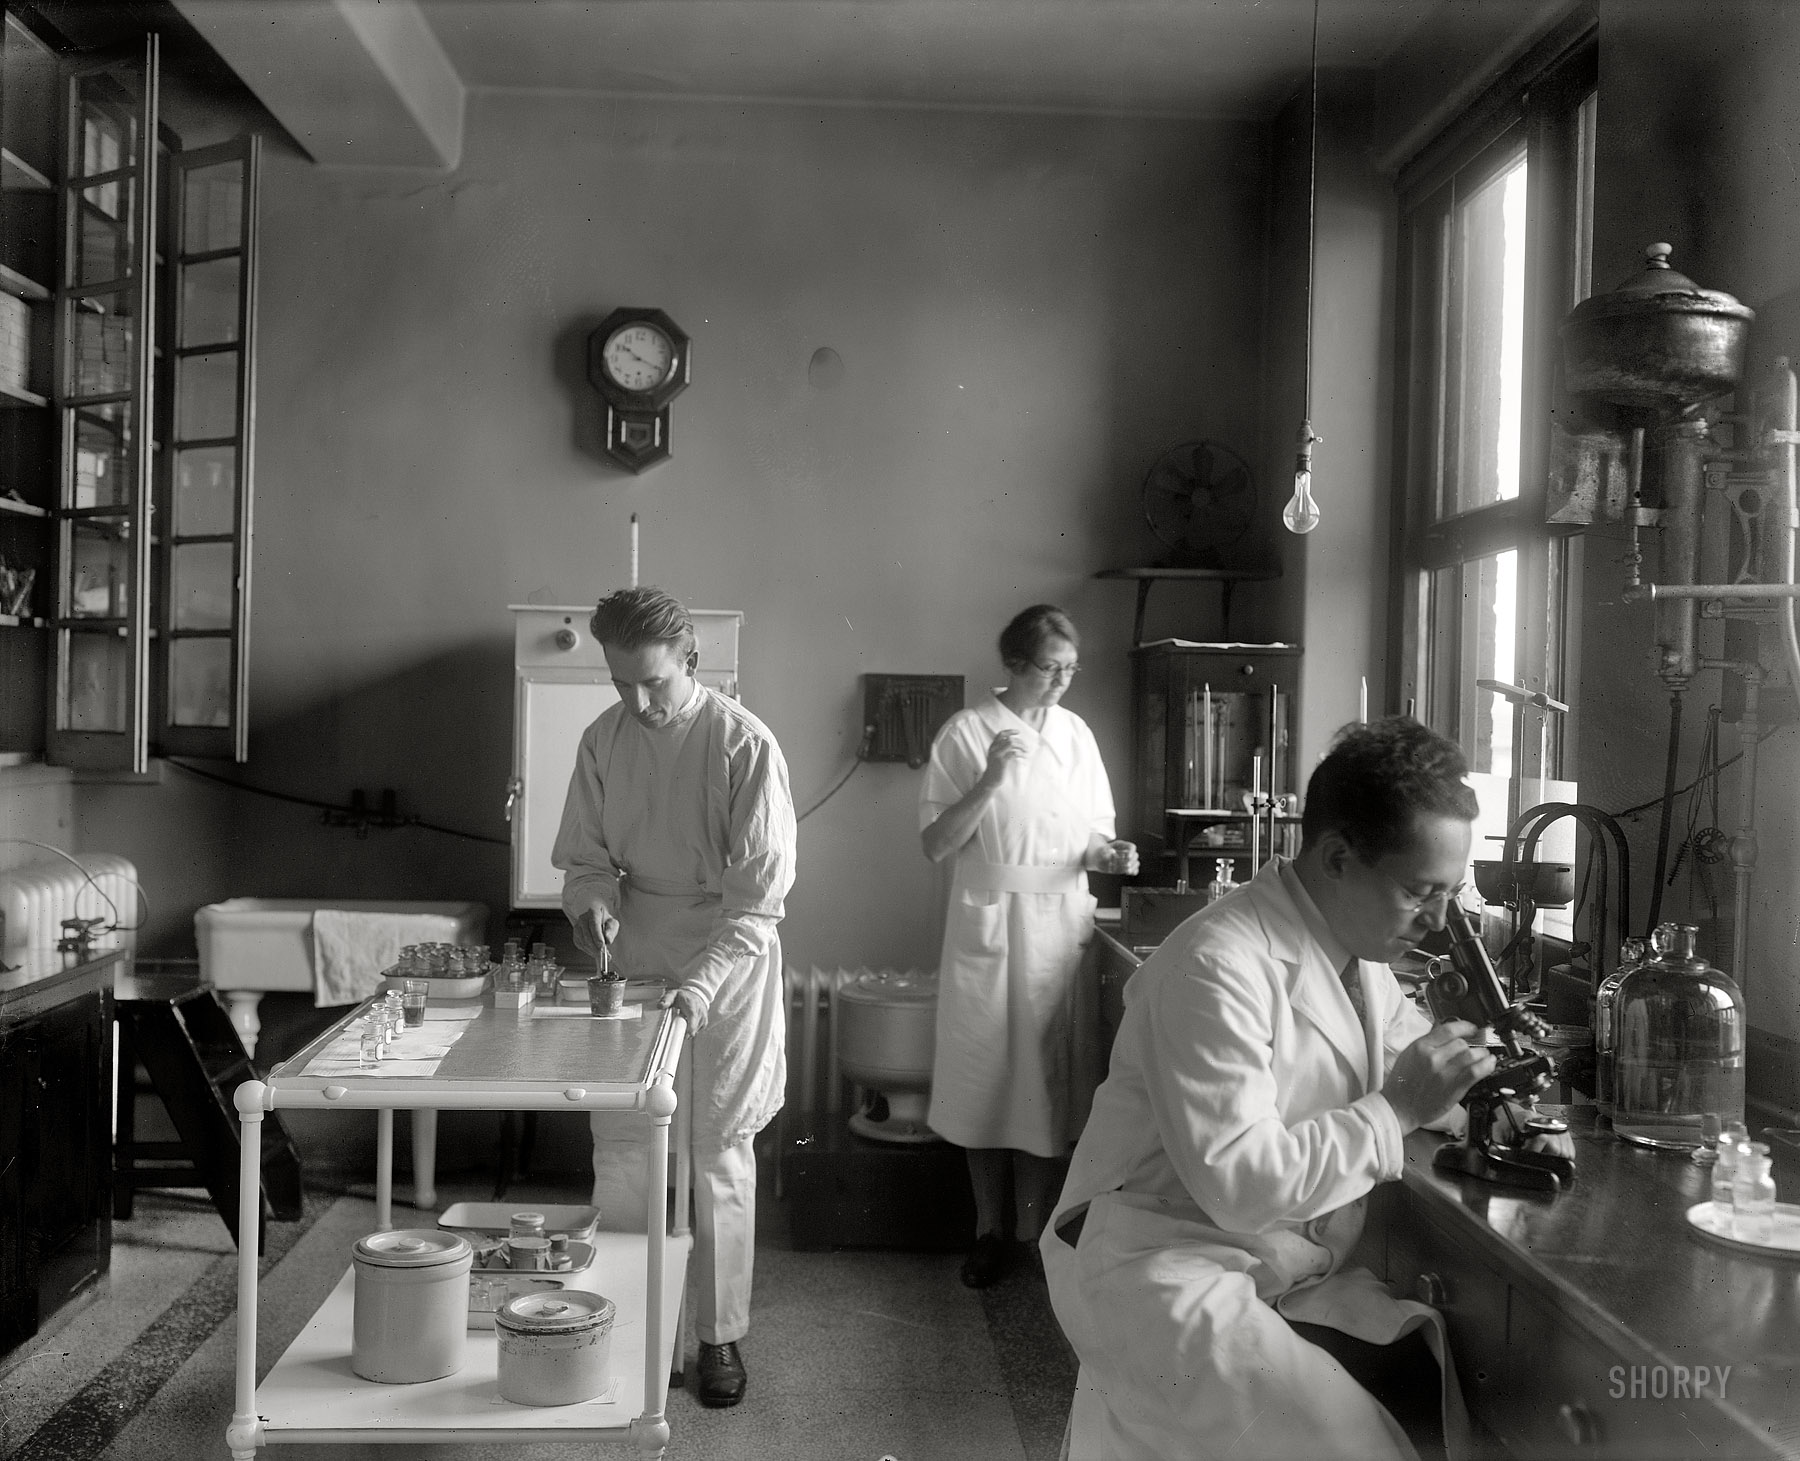 Washington, D.C., circa 1920. "Emergency Hospital, interior." The latest in lab facilities. Harris & Ewing Collection glass negative. View full size.